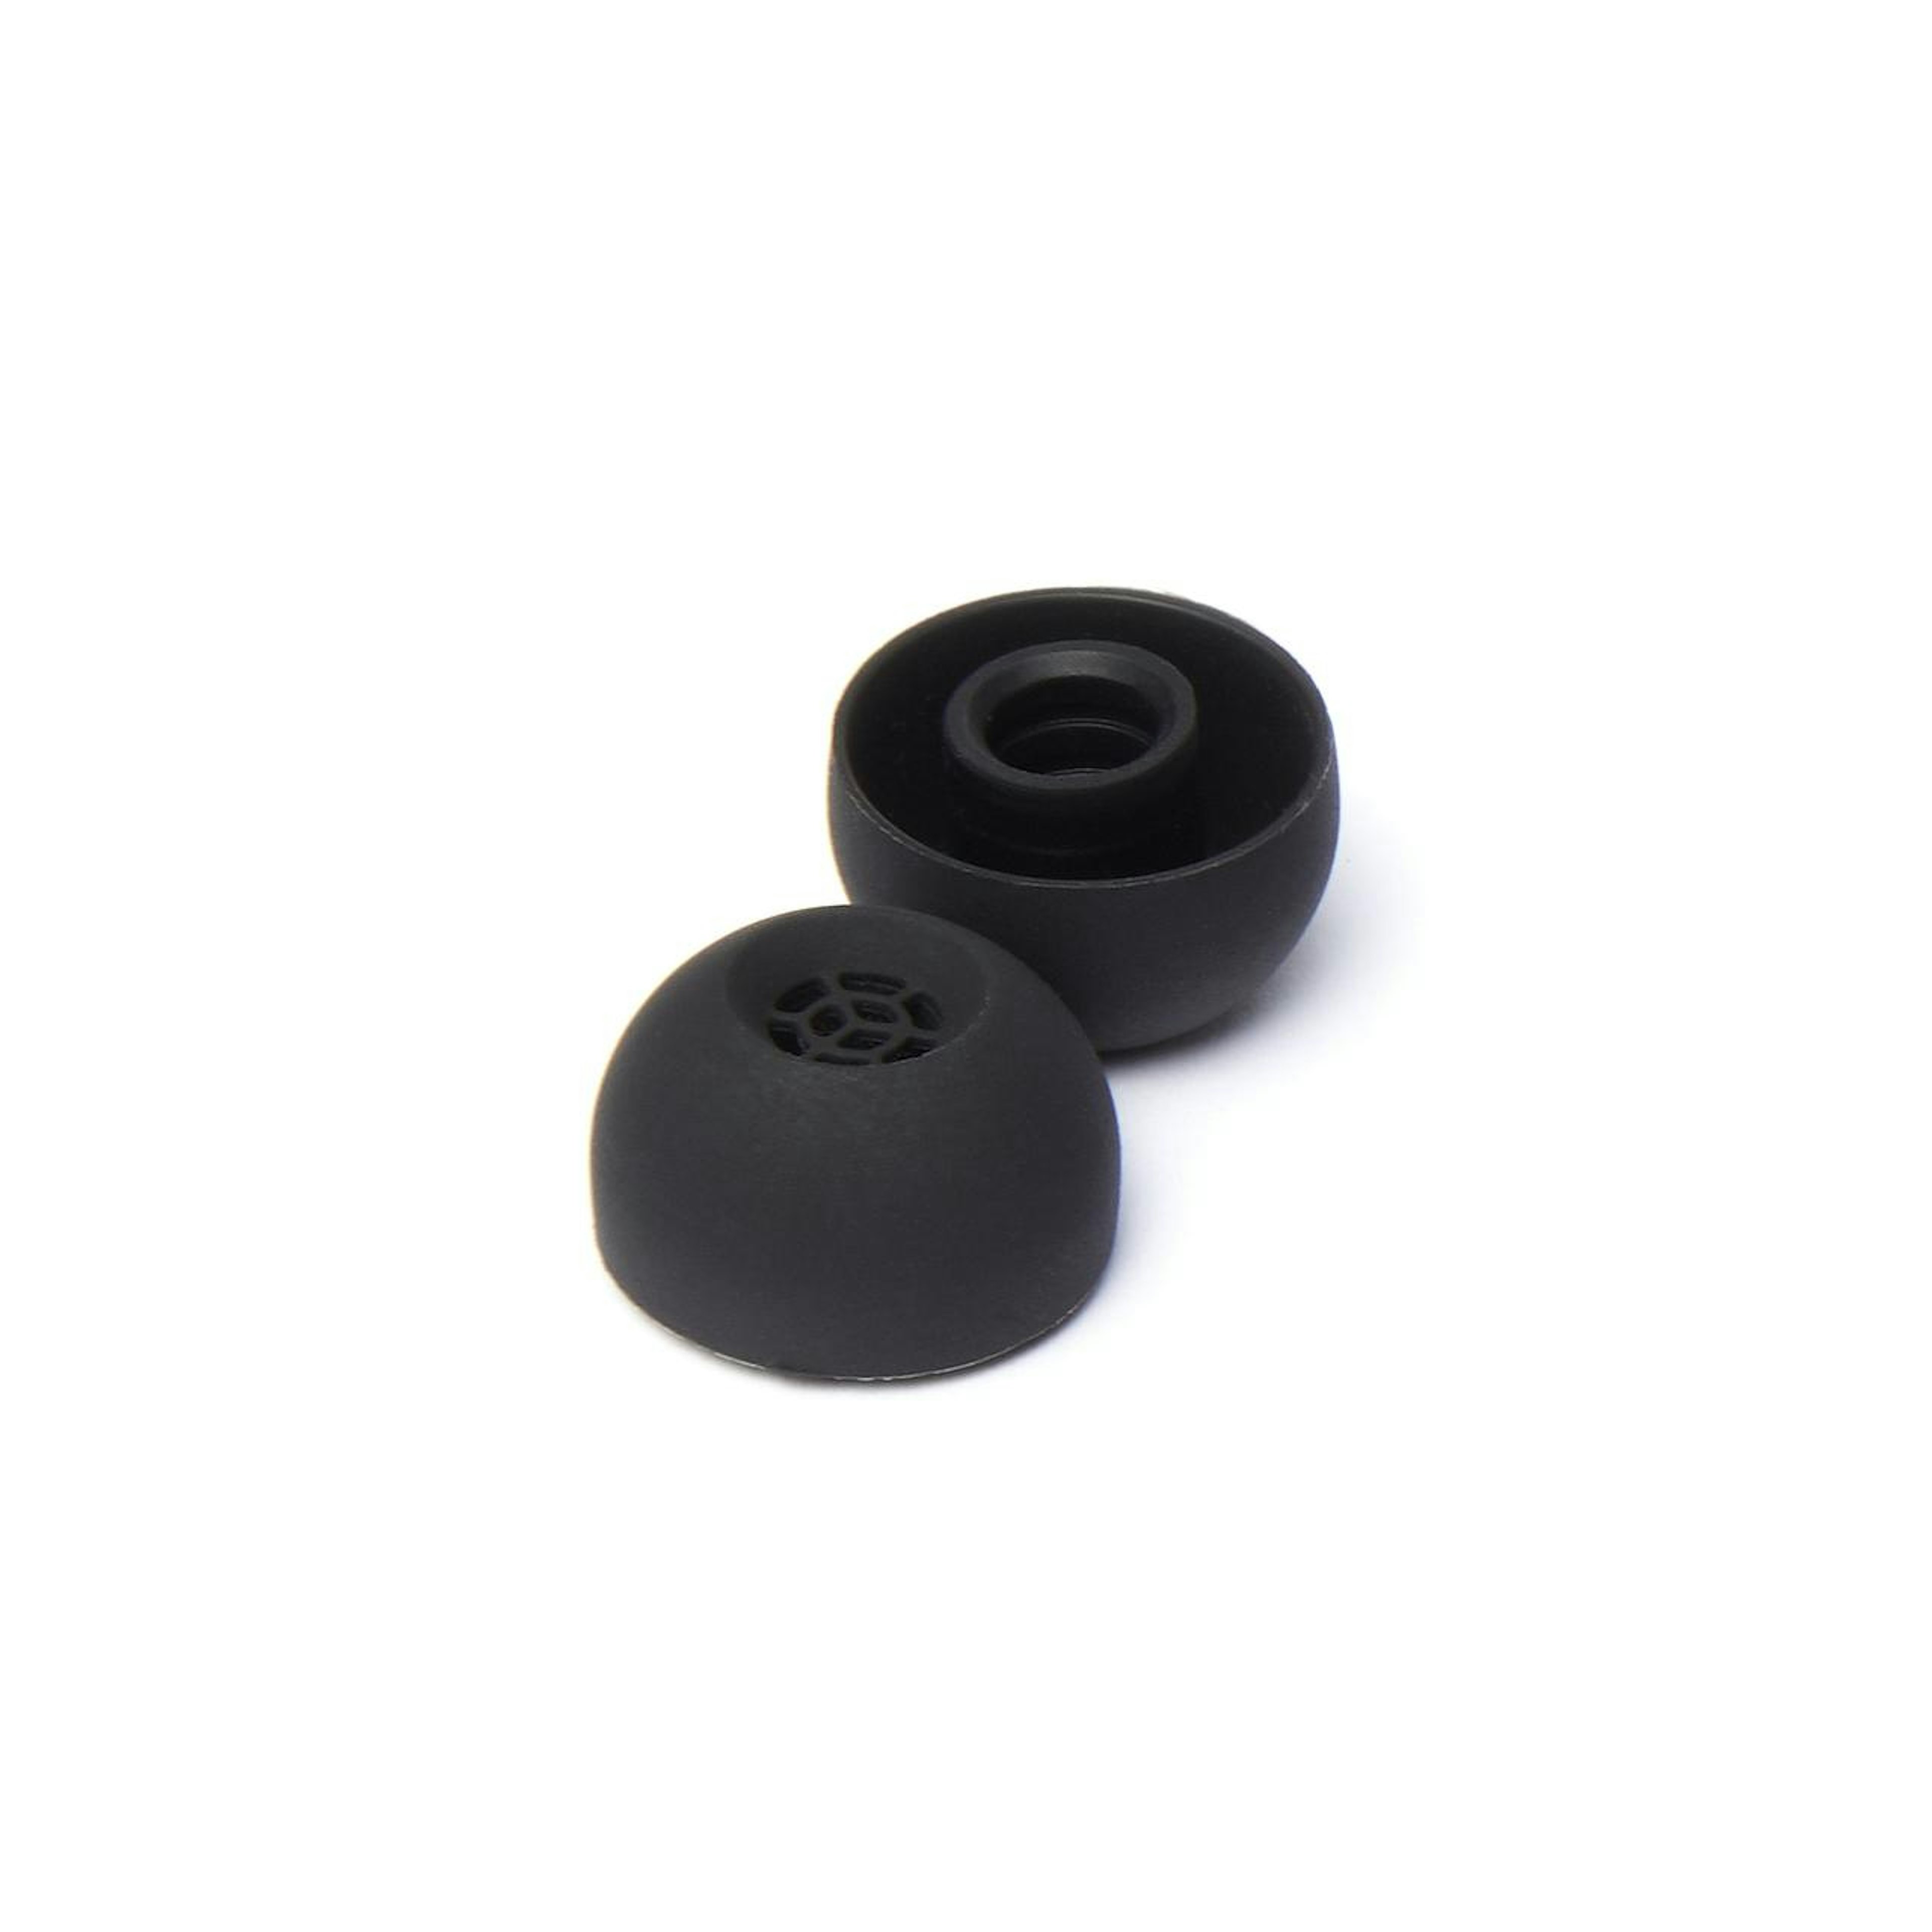 IE Series Ear Adapter Silicone (L)